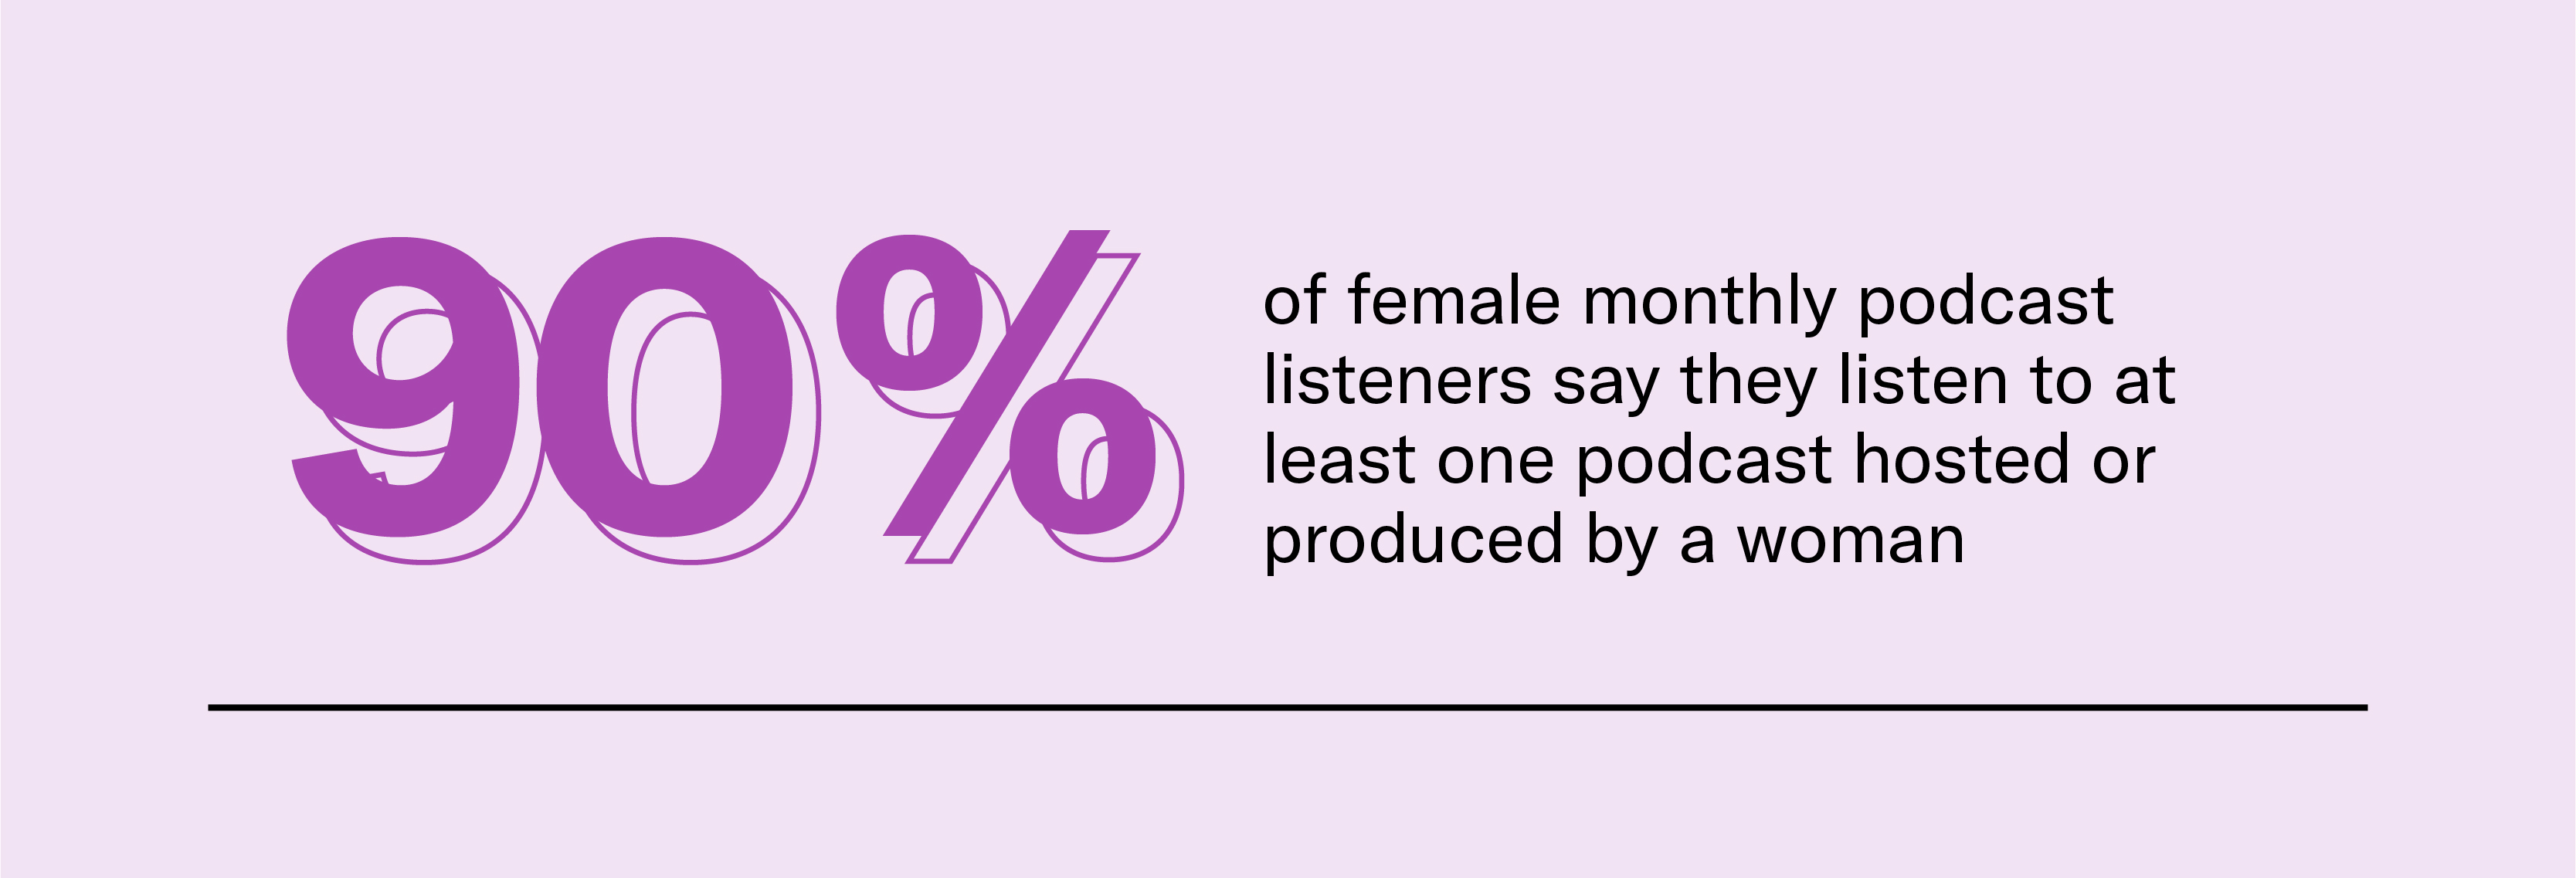 90% of women listen to a podcast produced or hosted by a woman